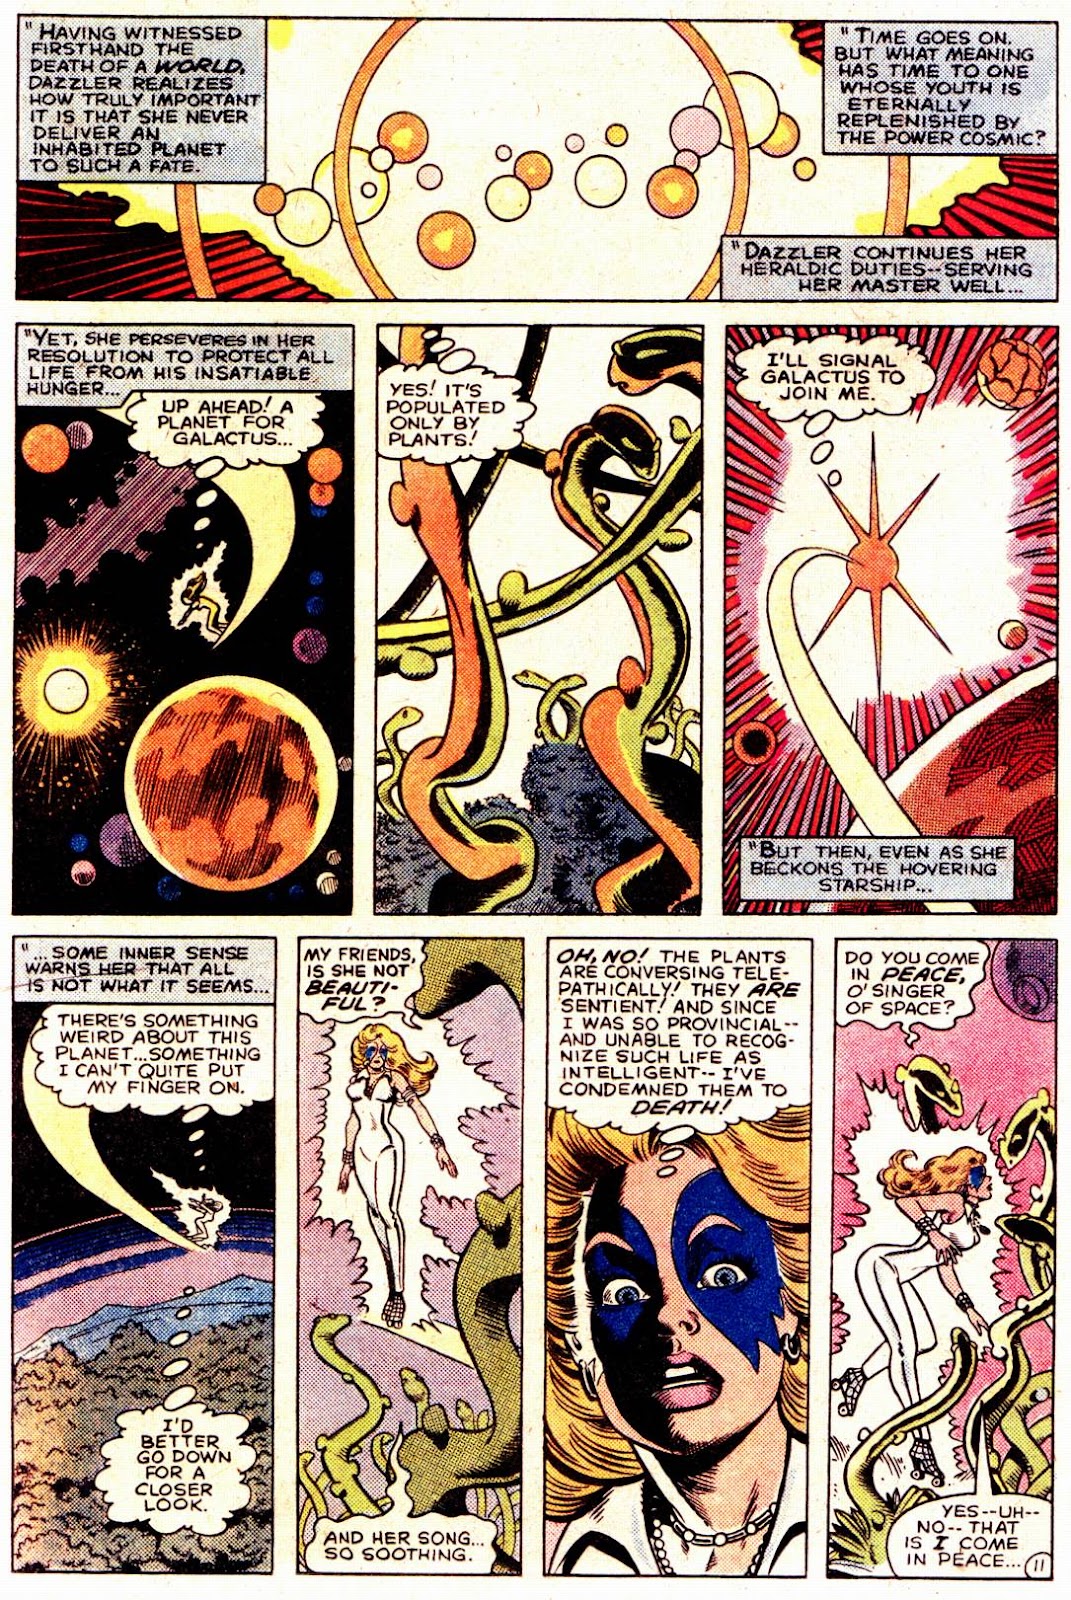 What If? (1977) issue 33 - Dazzler and Iron Man - Page 12